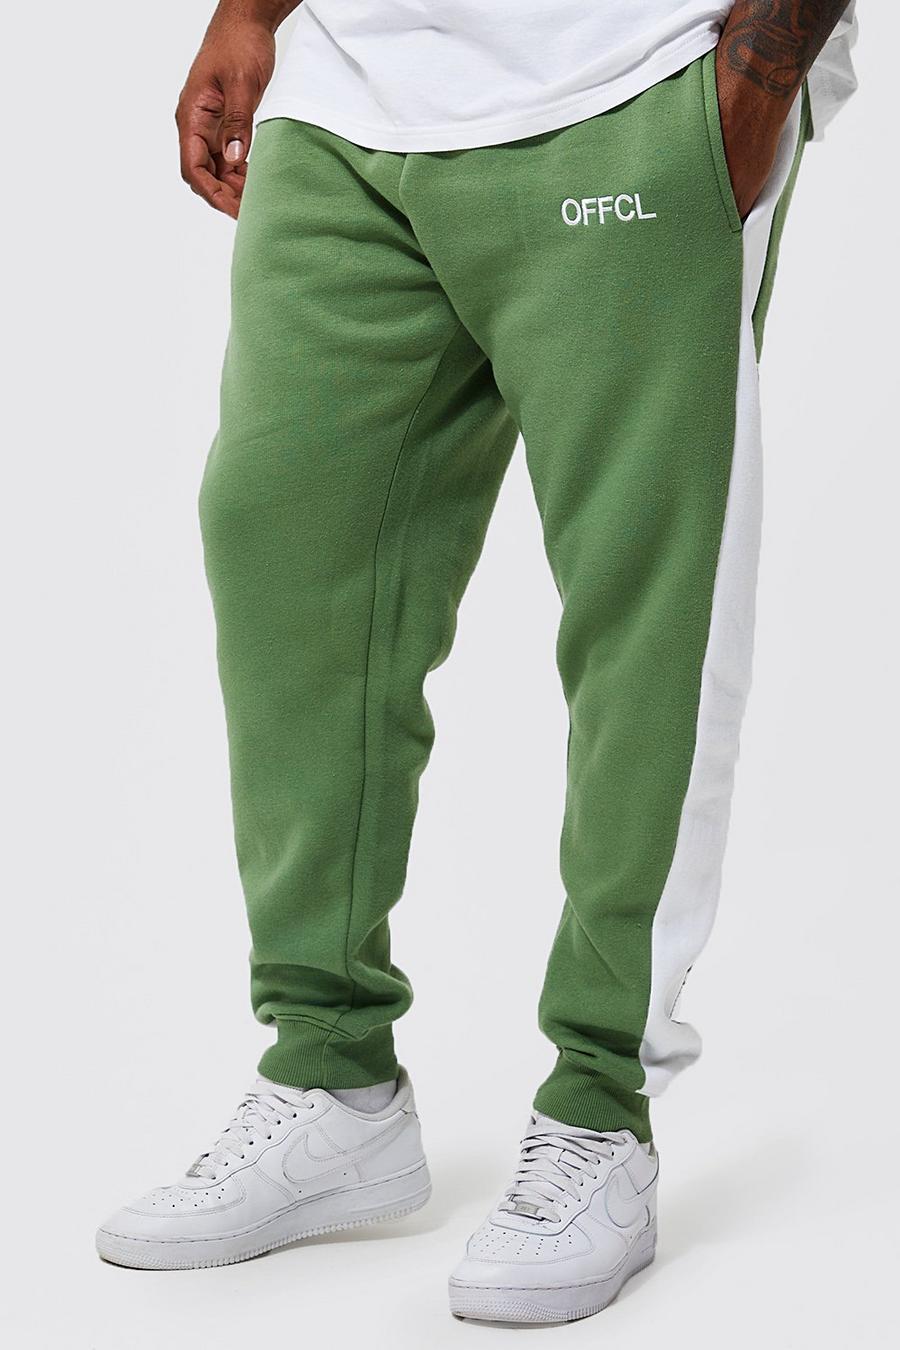 Pantalón deportivo Plus Offcl pitillo con panel lateral, Sage green image number 1